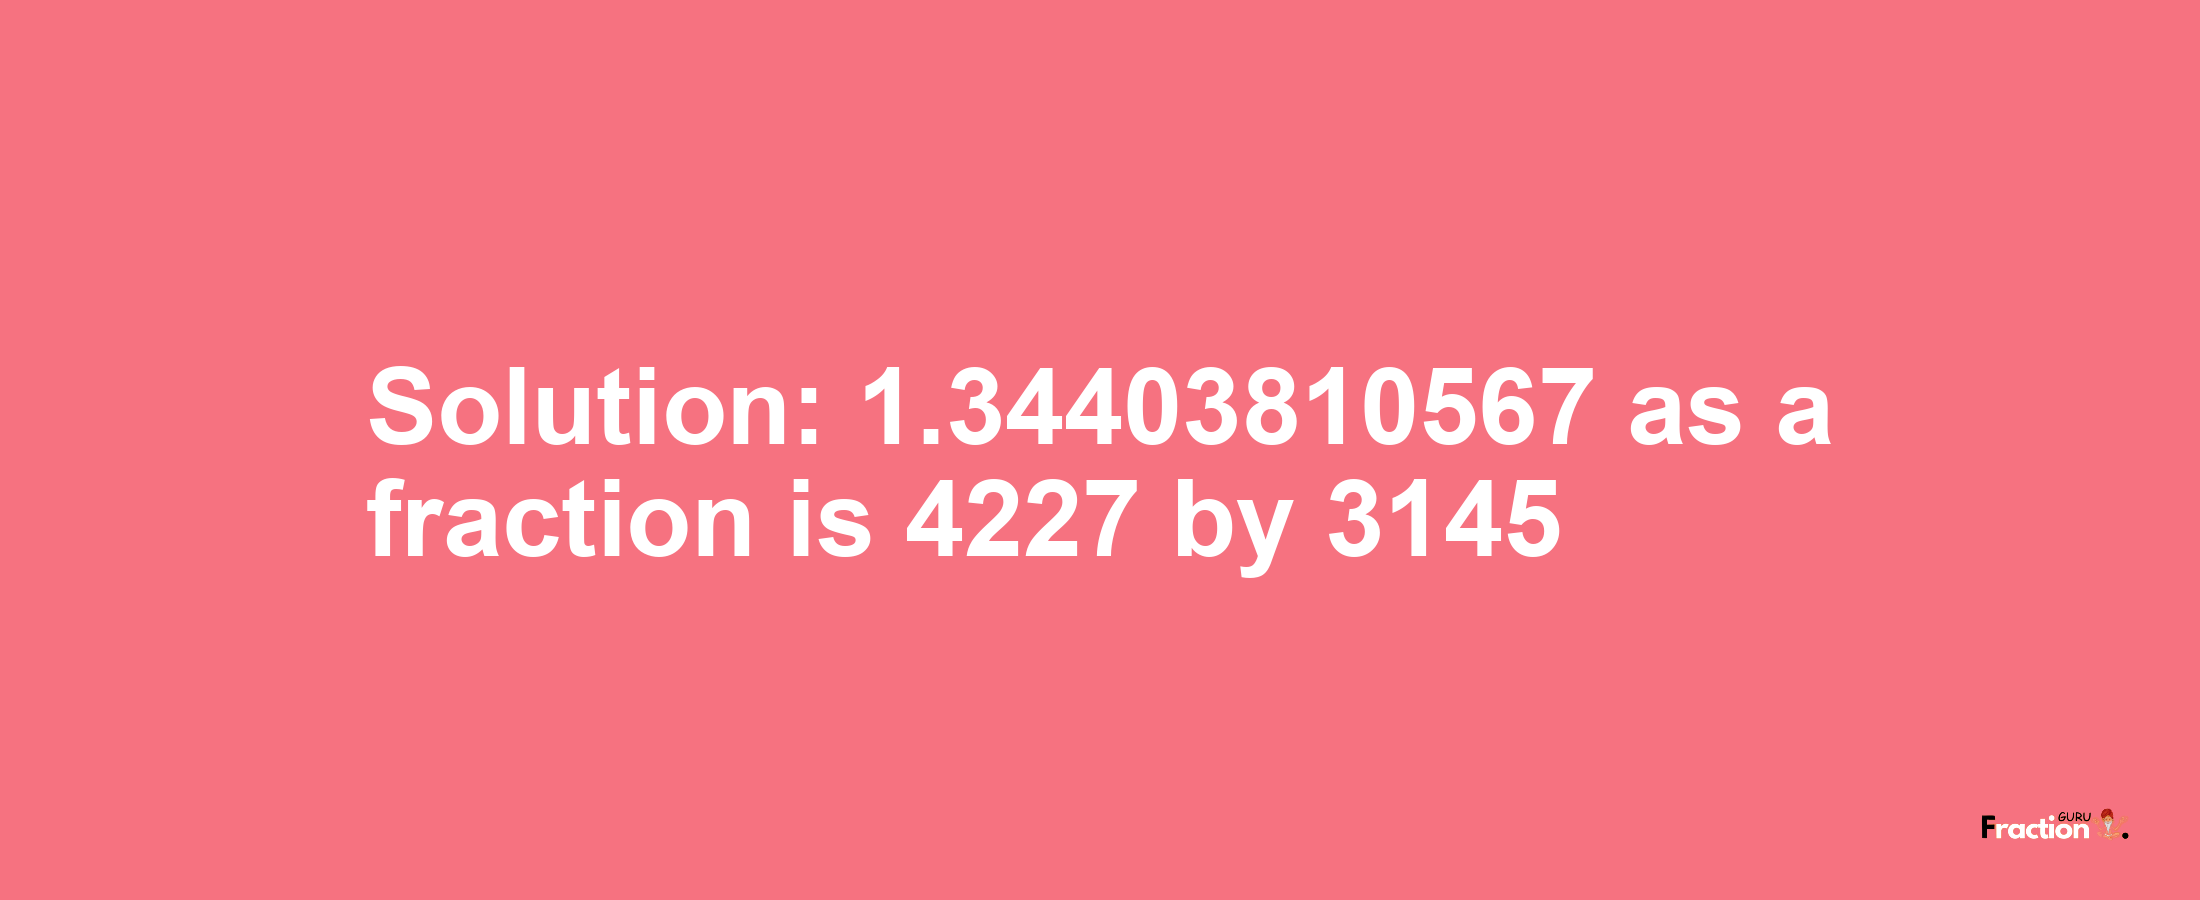 Solution:1.34403810567 as a fraction is 4227/3145